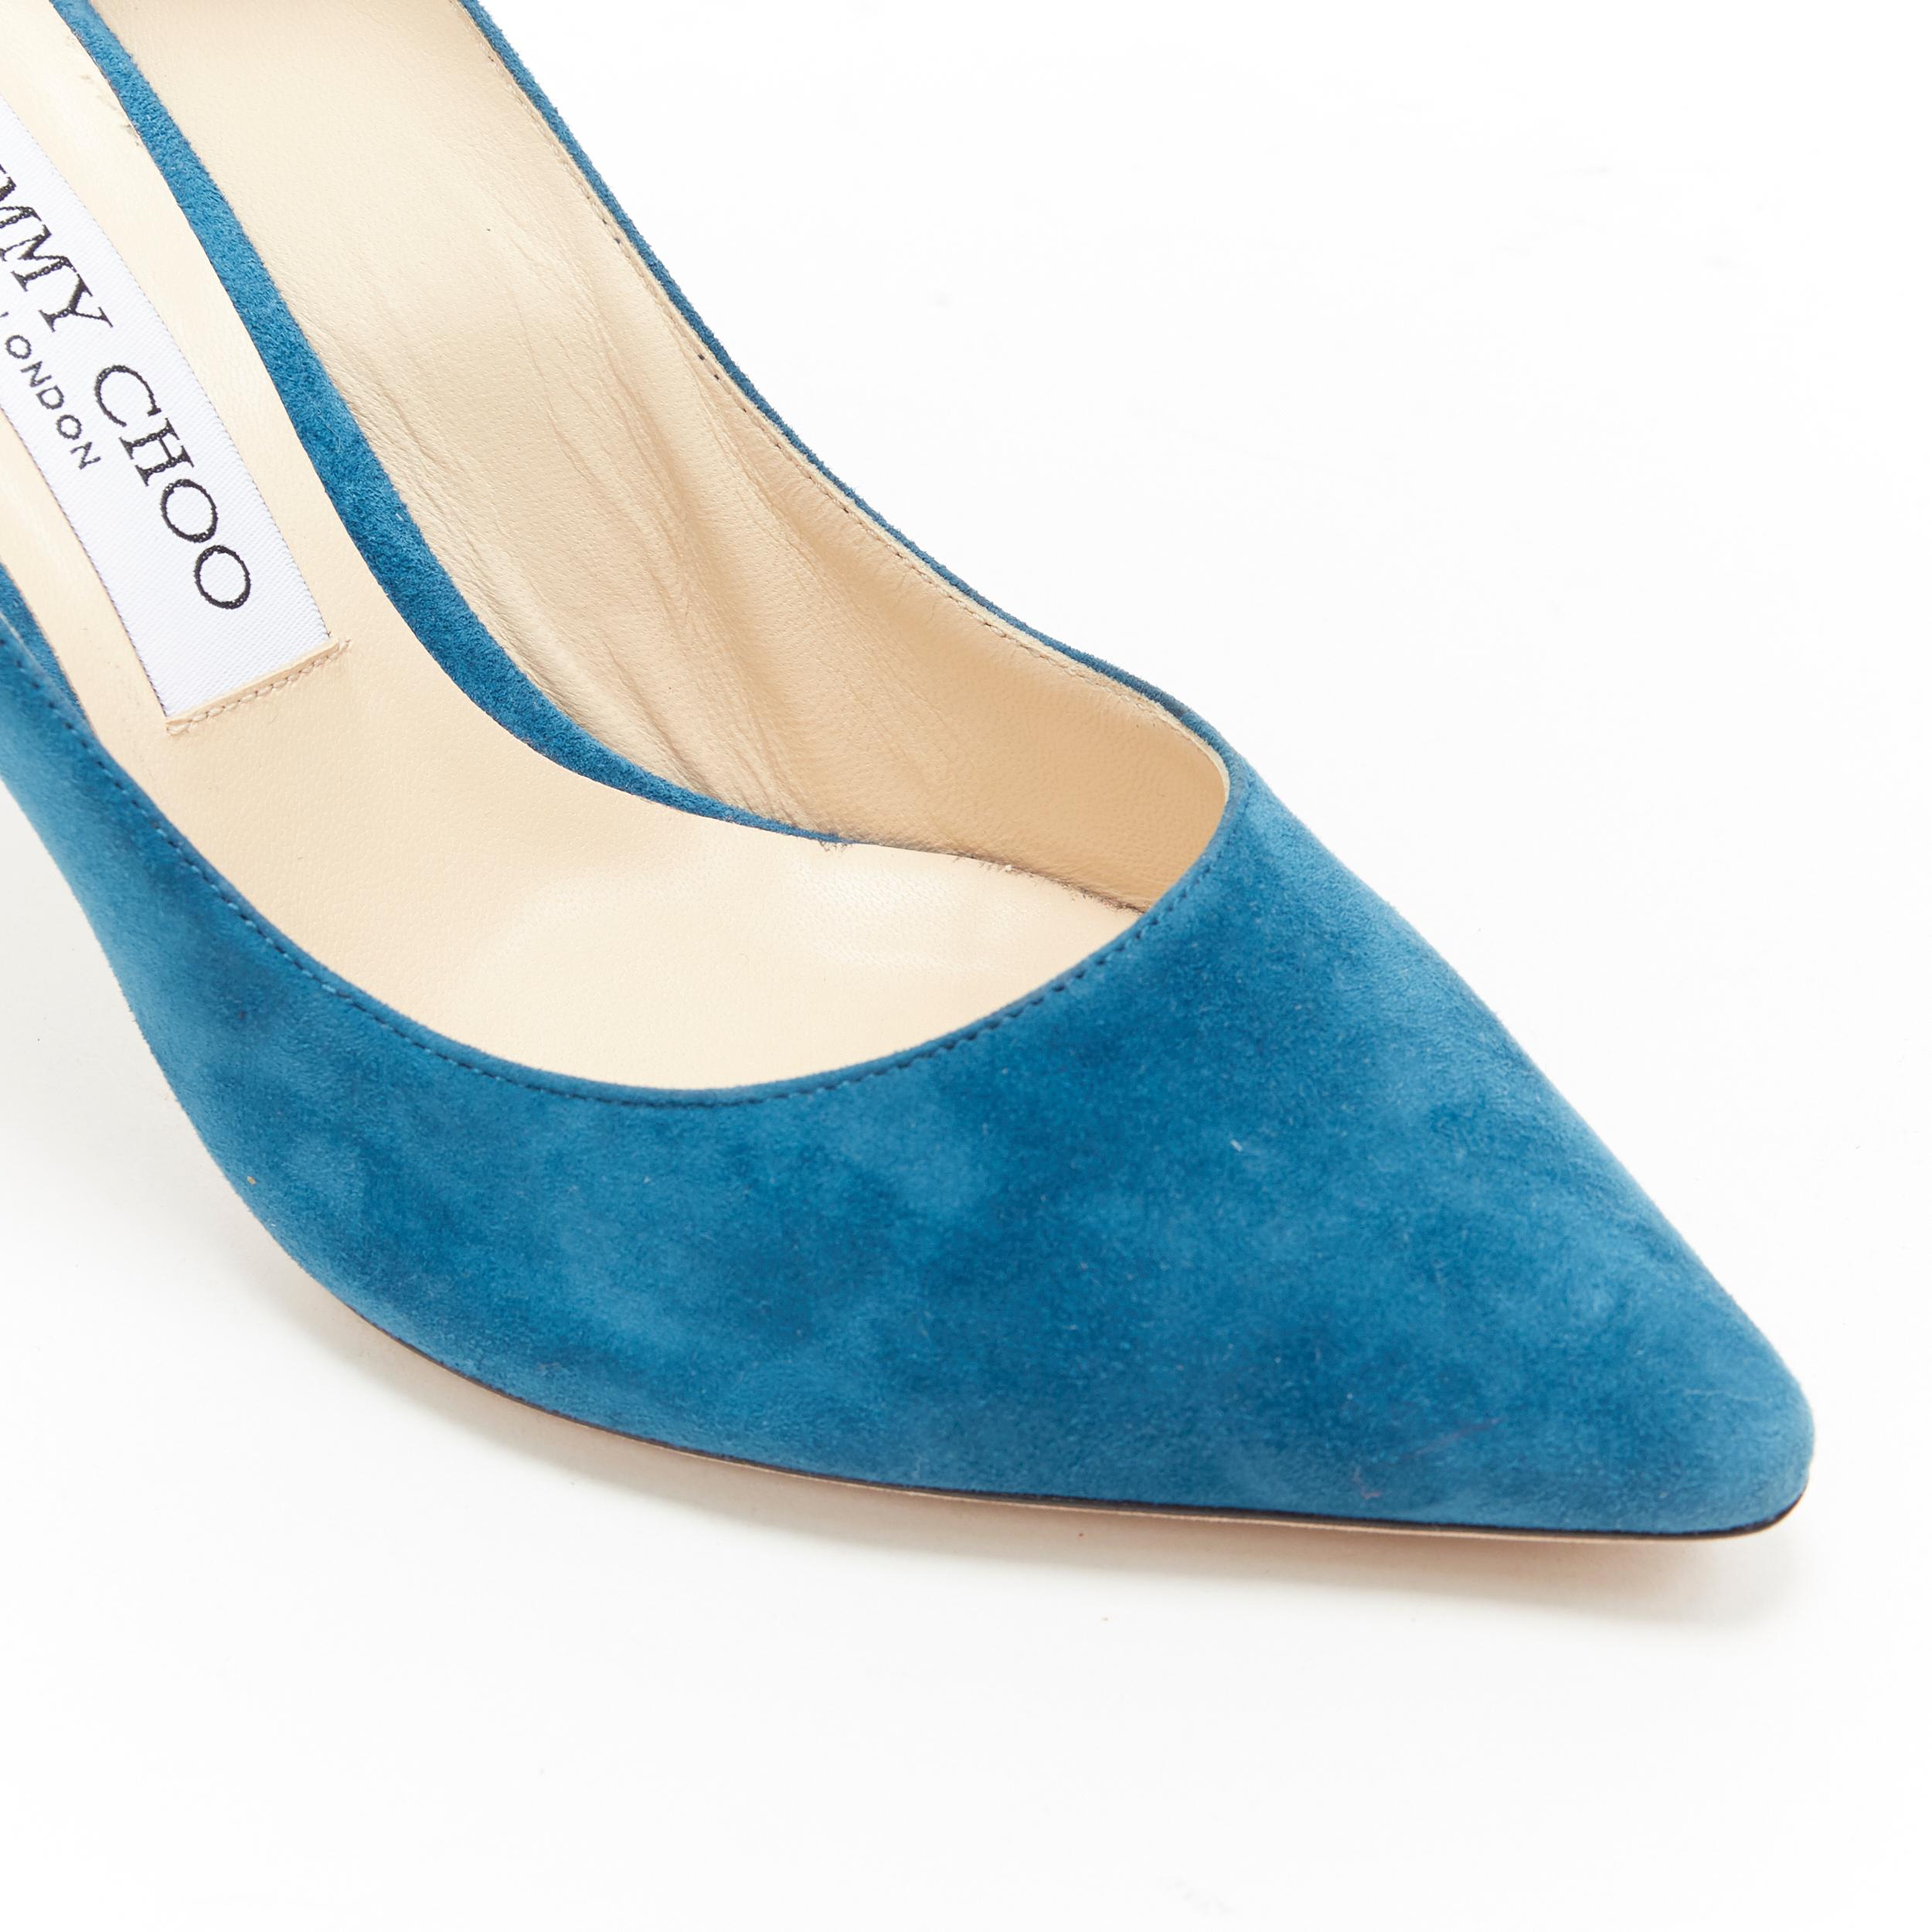 JIMMY CHOO Romy 85 teal blue suede leather point toe pigalle pump EU37 2